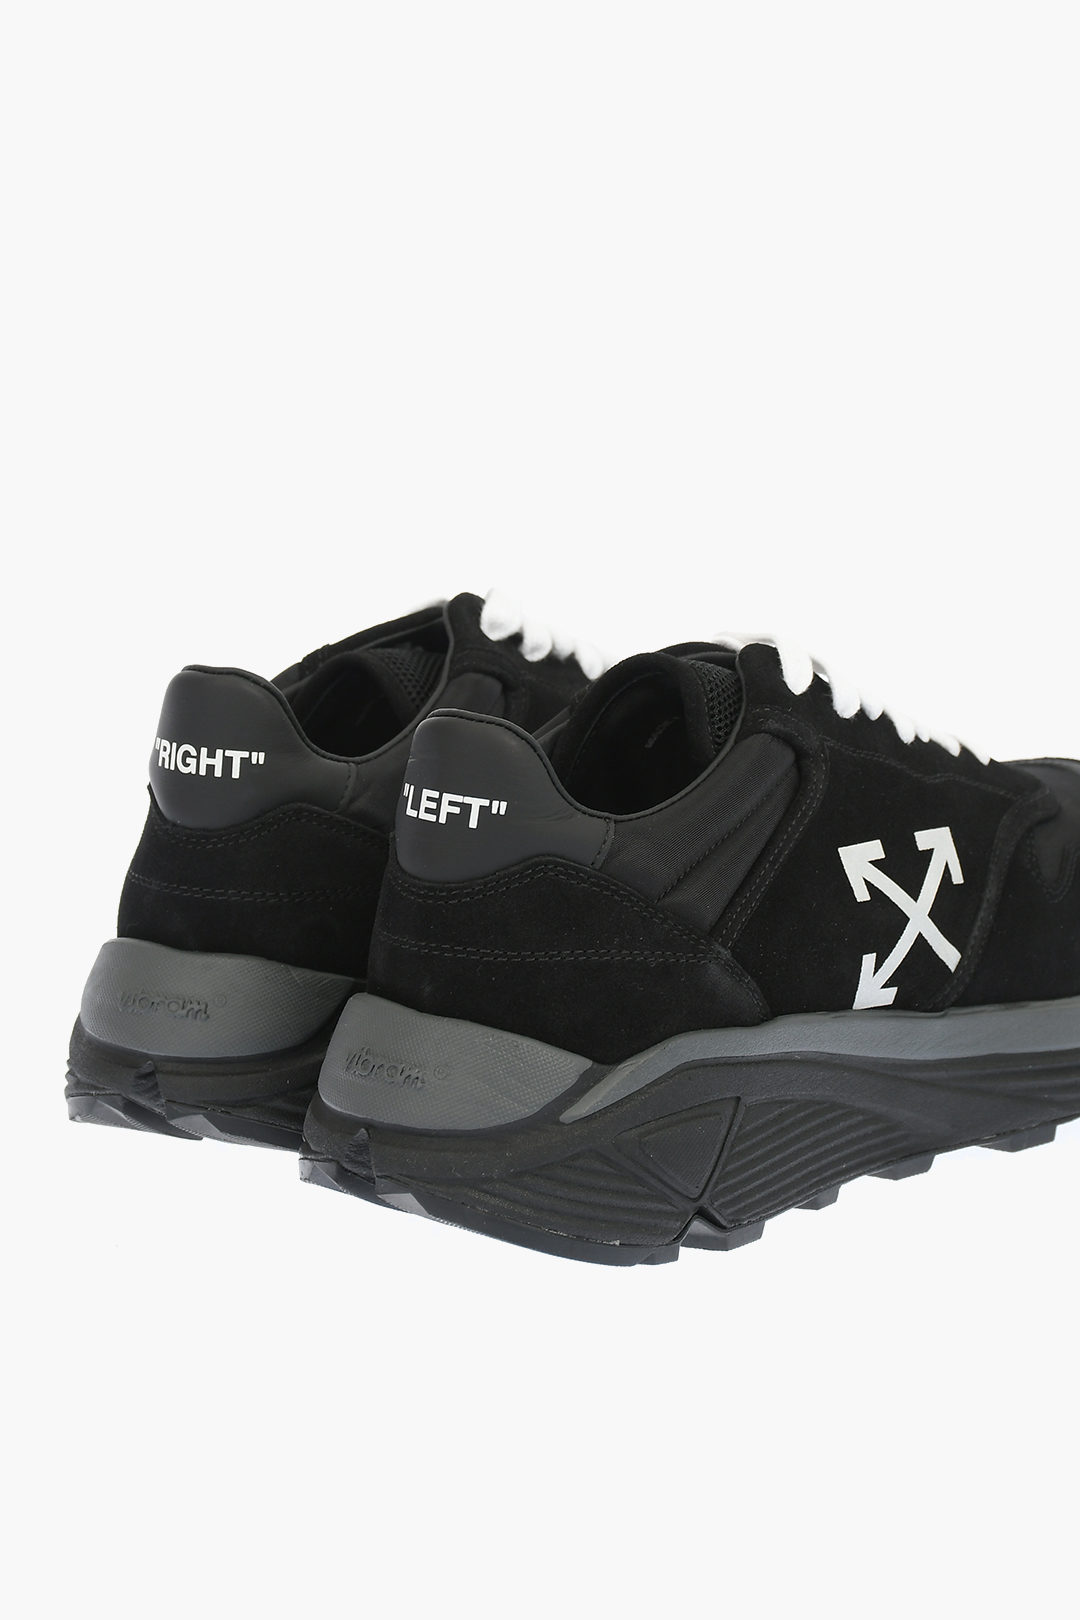 Aggregate more than 141 off white jogger sneaker